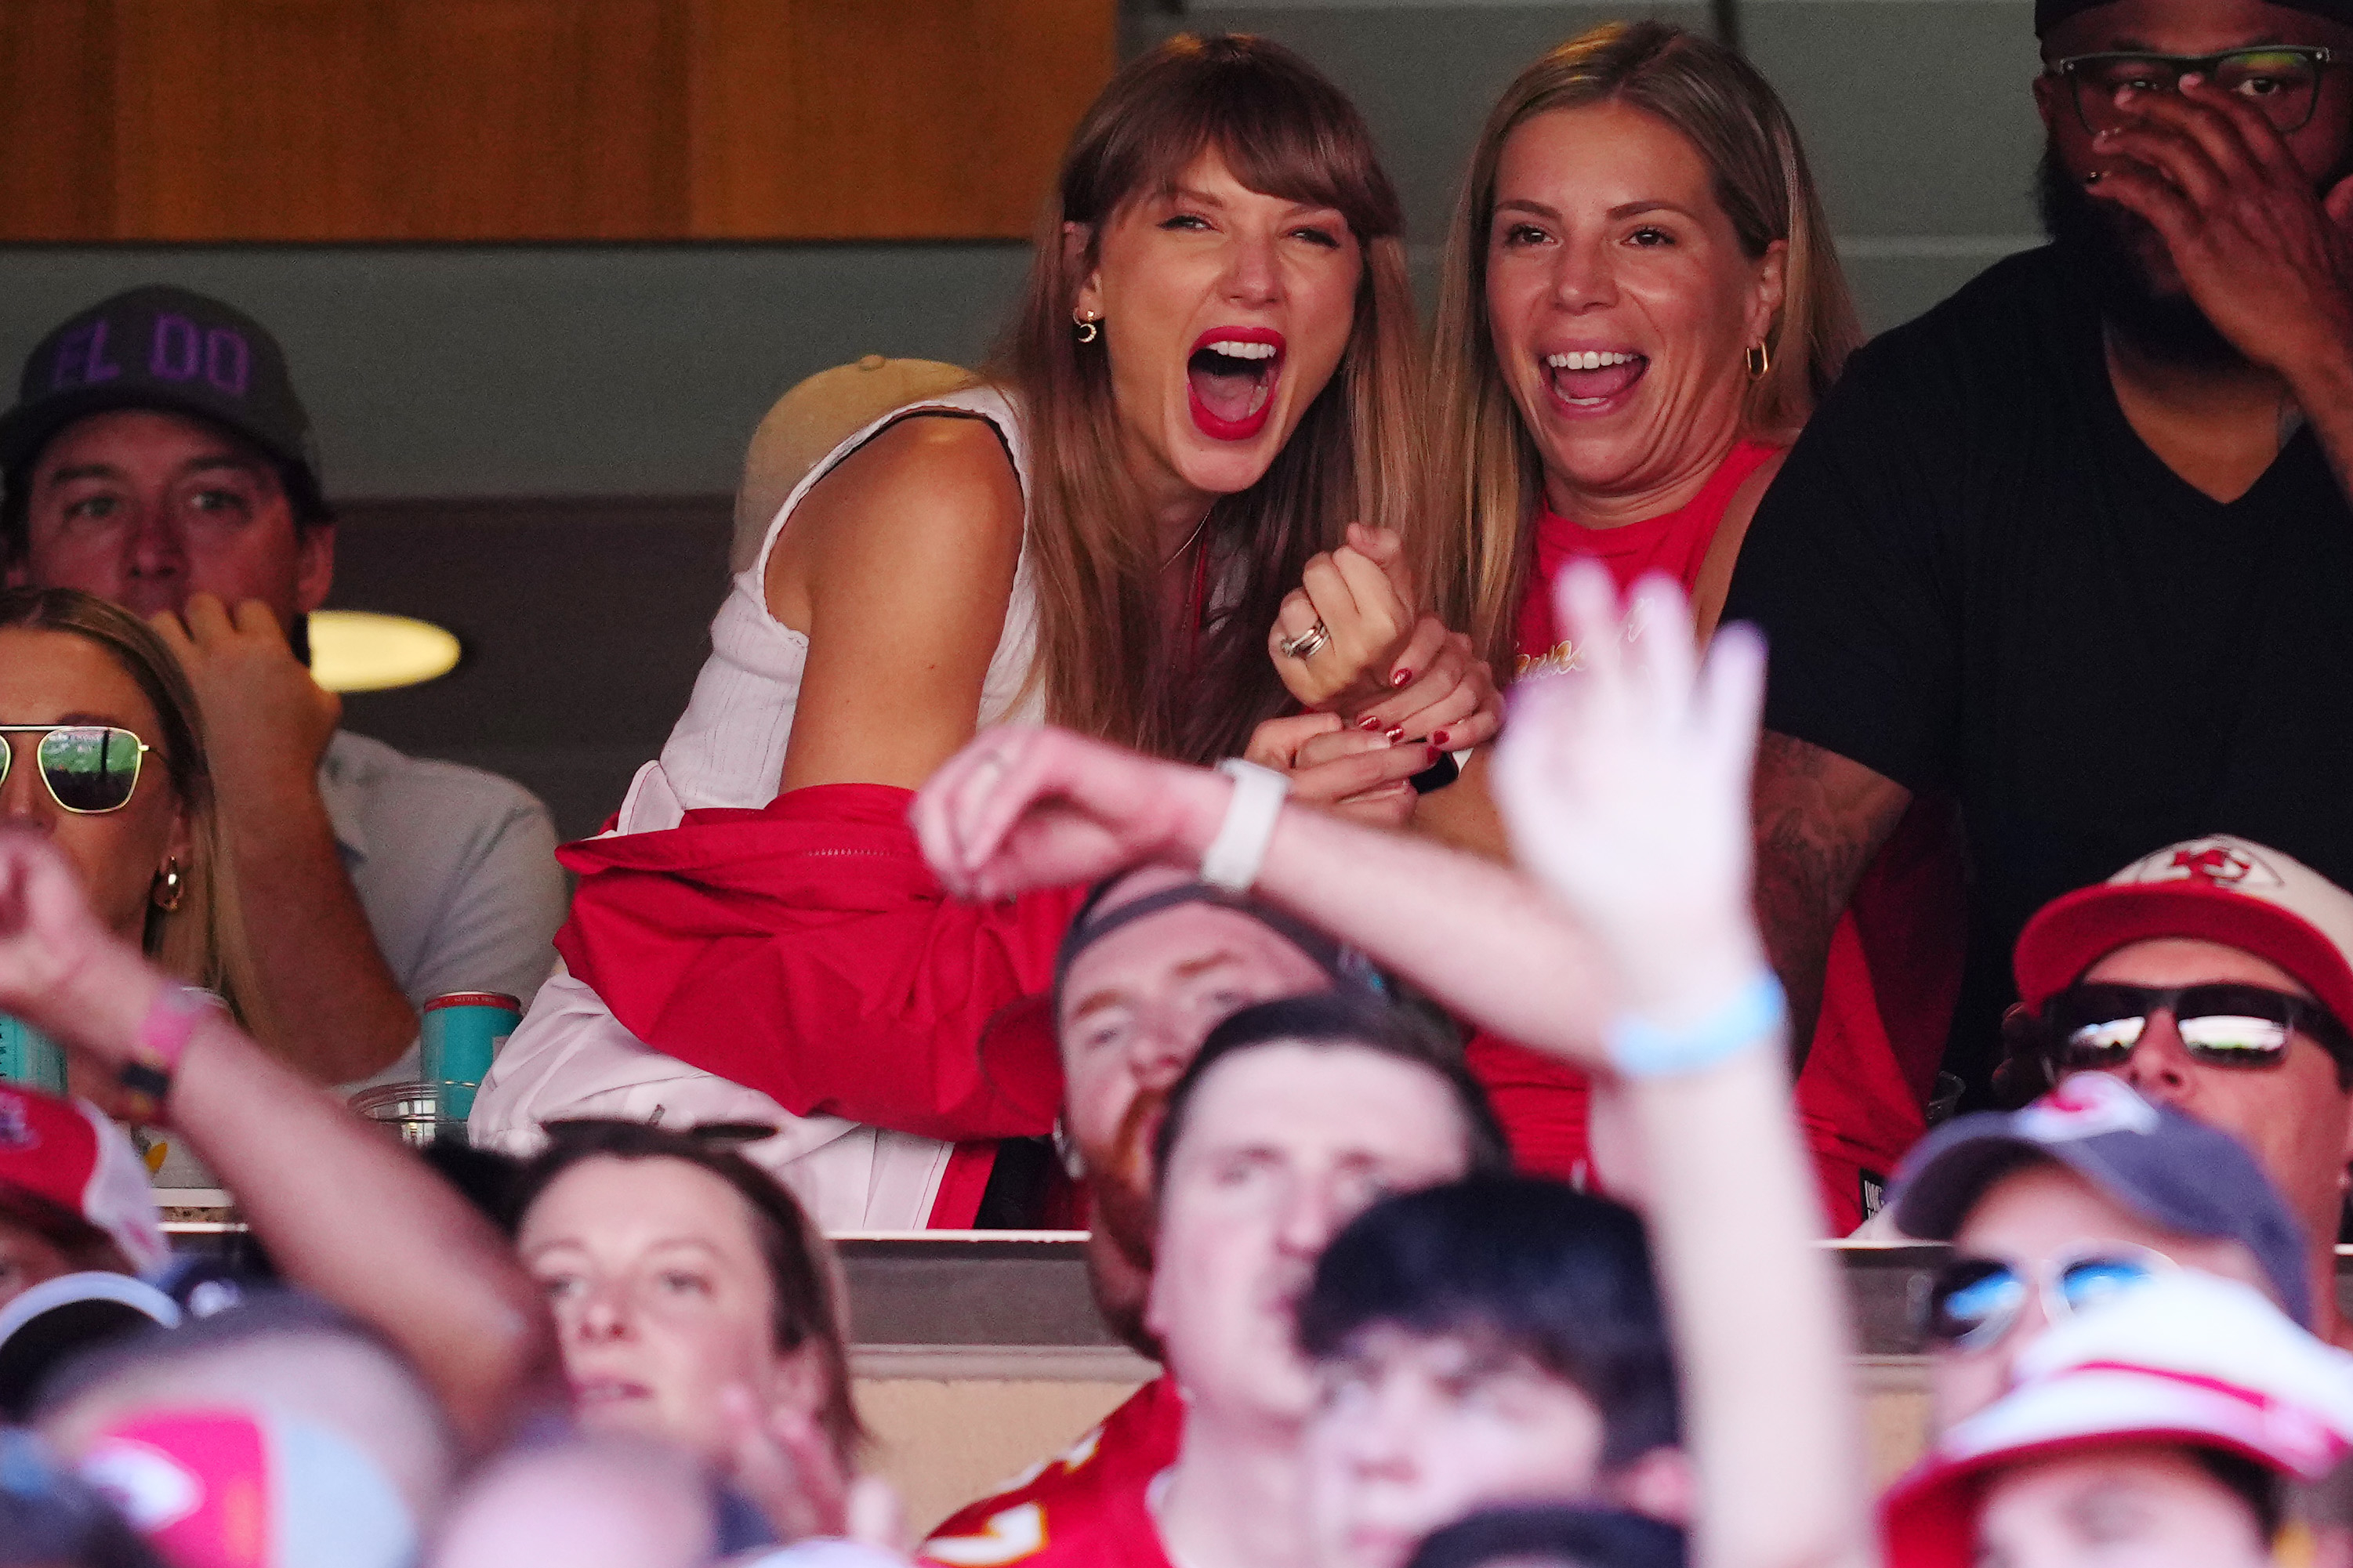 Close-up of Taylor in the VIP suite with others